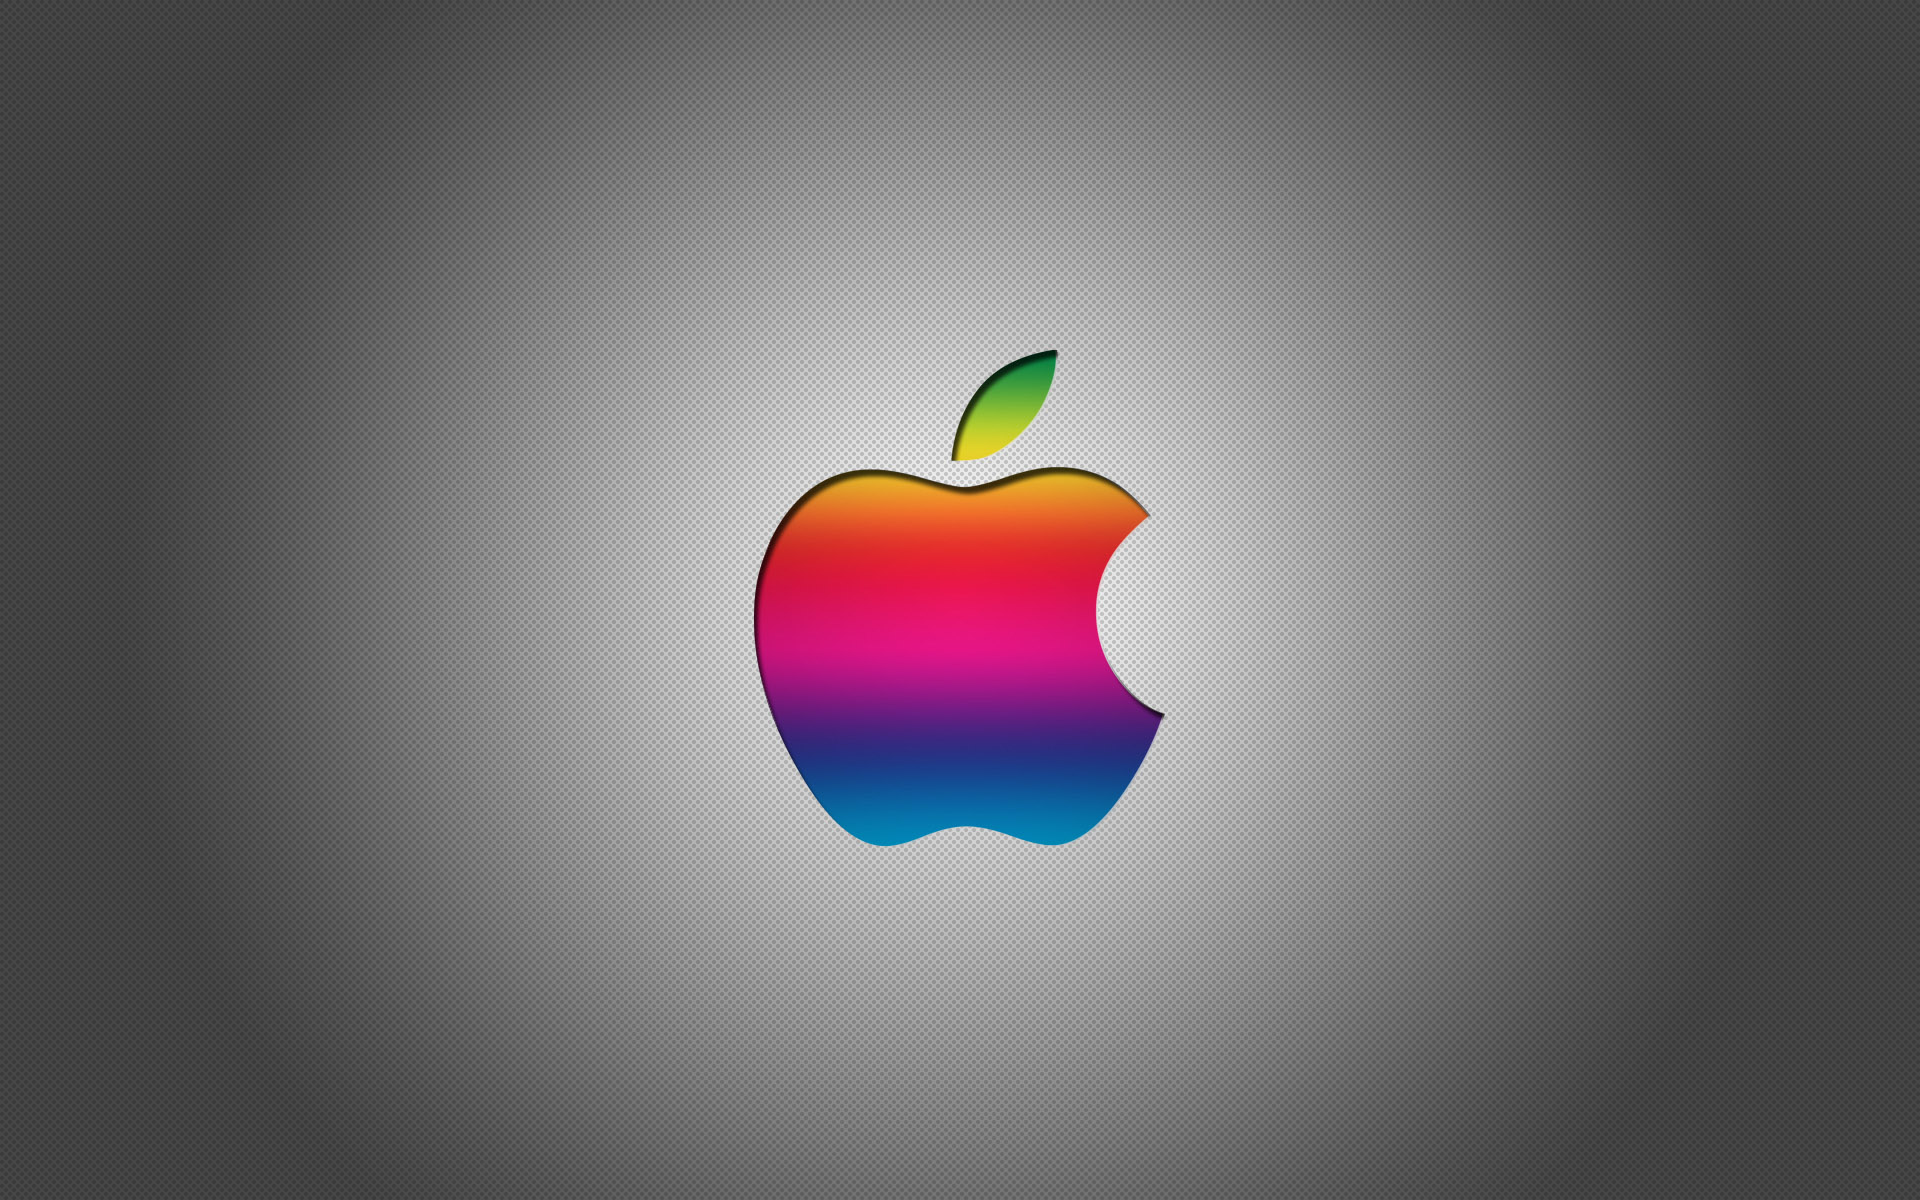 Cool Apple Mac Wallpaper Jpg Pictures To